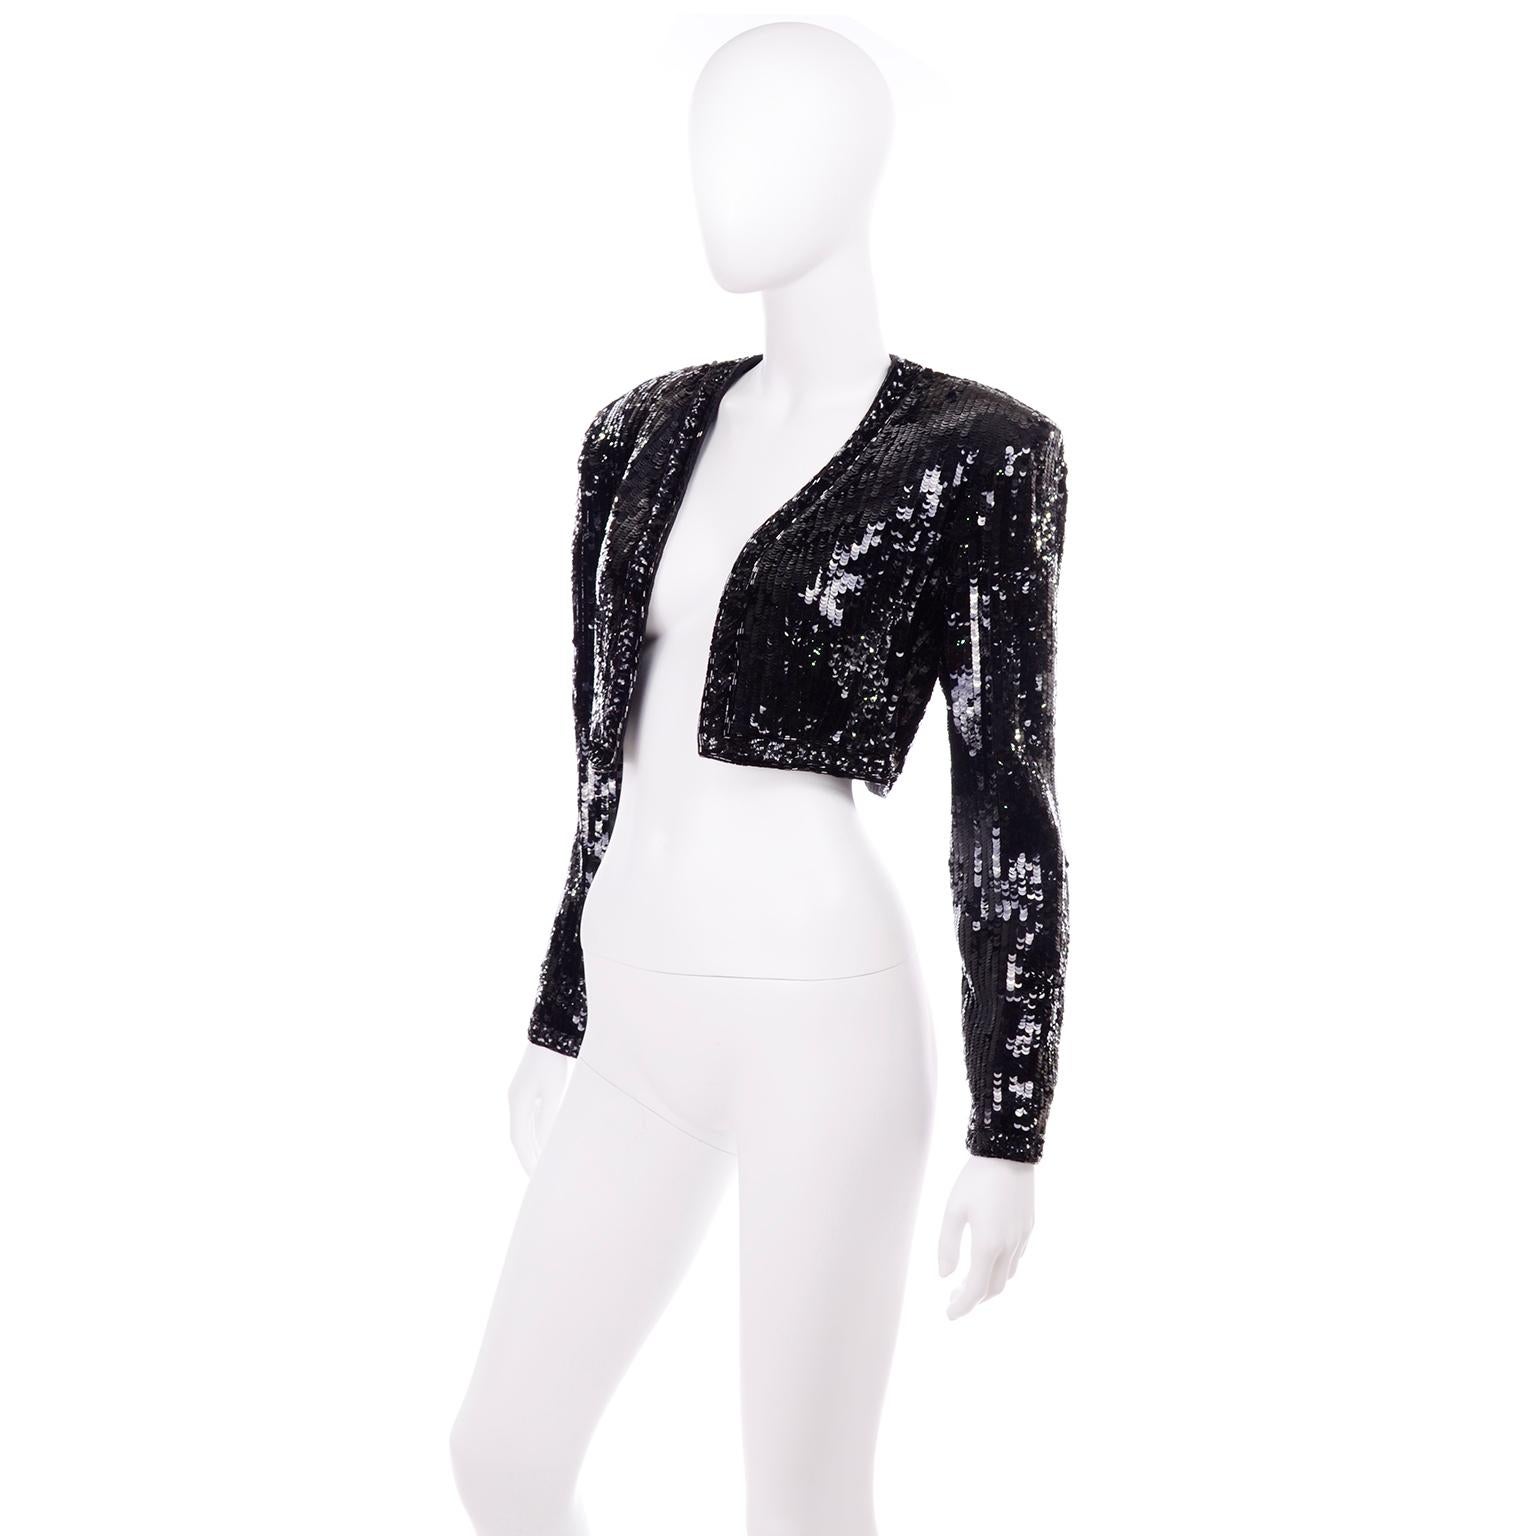 This is a vintage 1980's Fabrice Silhouette cropped black sequin evening jacket that would be perfect to wear over your evening dress! The shell is 100% silk and the lining is 100% rayon. There are shoulder pads and there is beautiful beading and